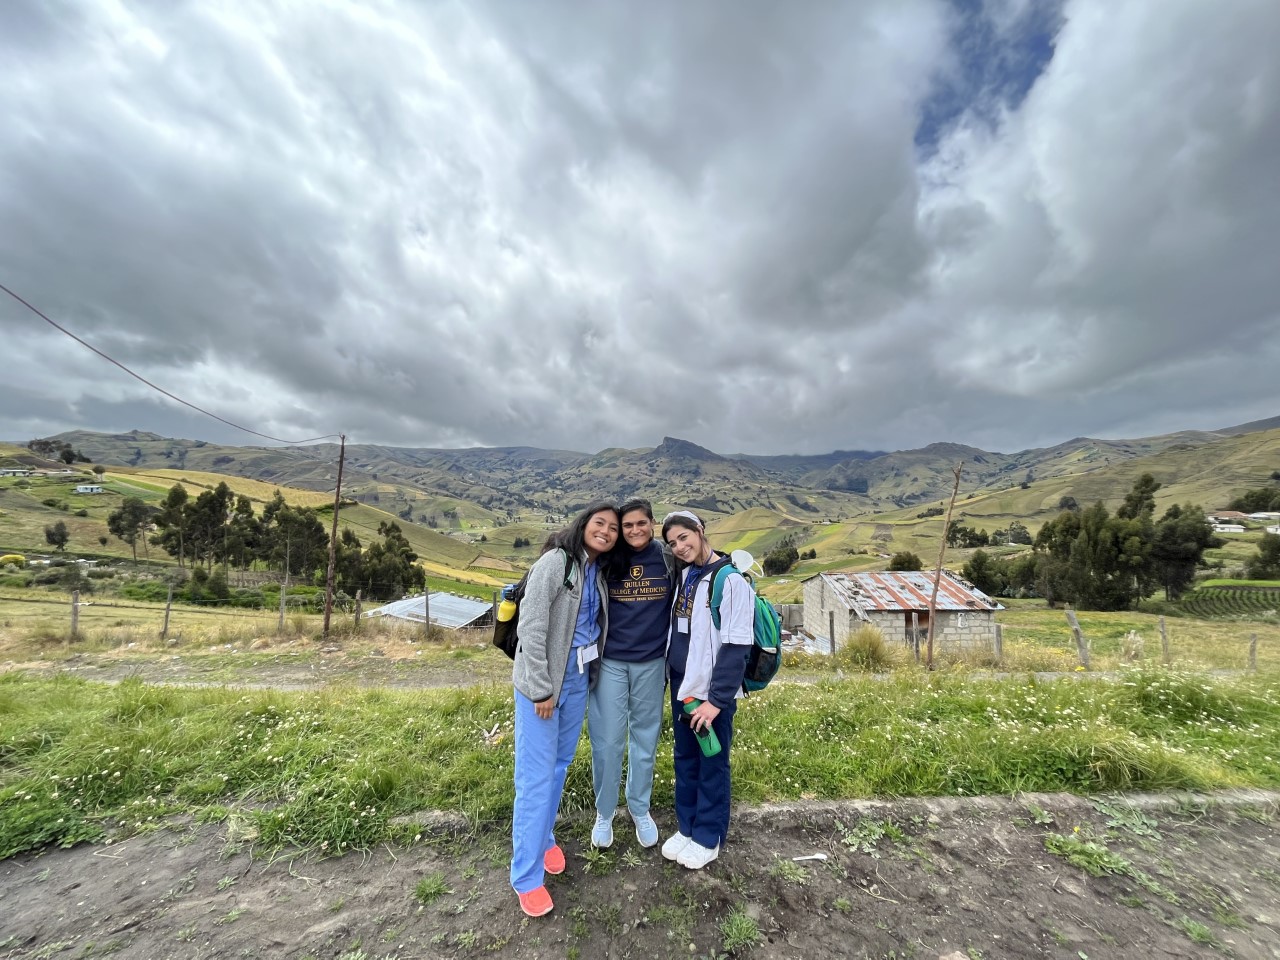 Three women standing in front of a beautiful hilly landscape with clouds